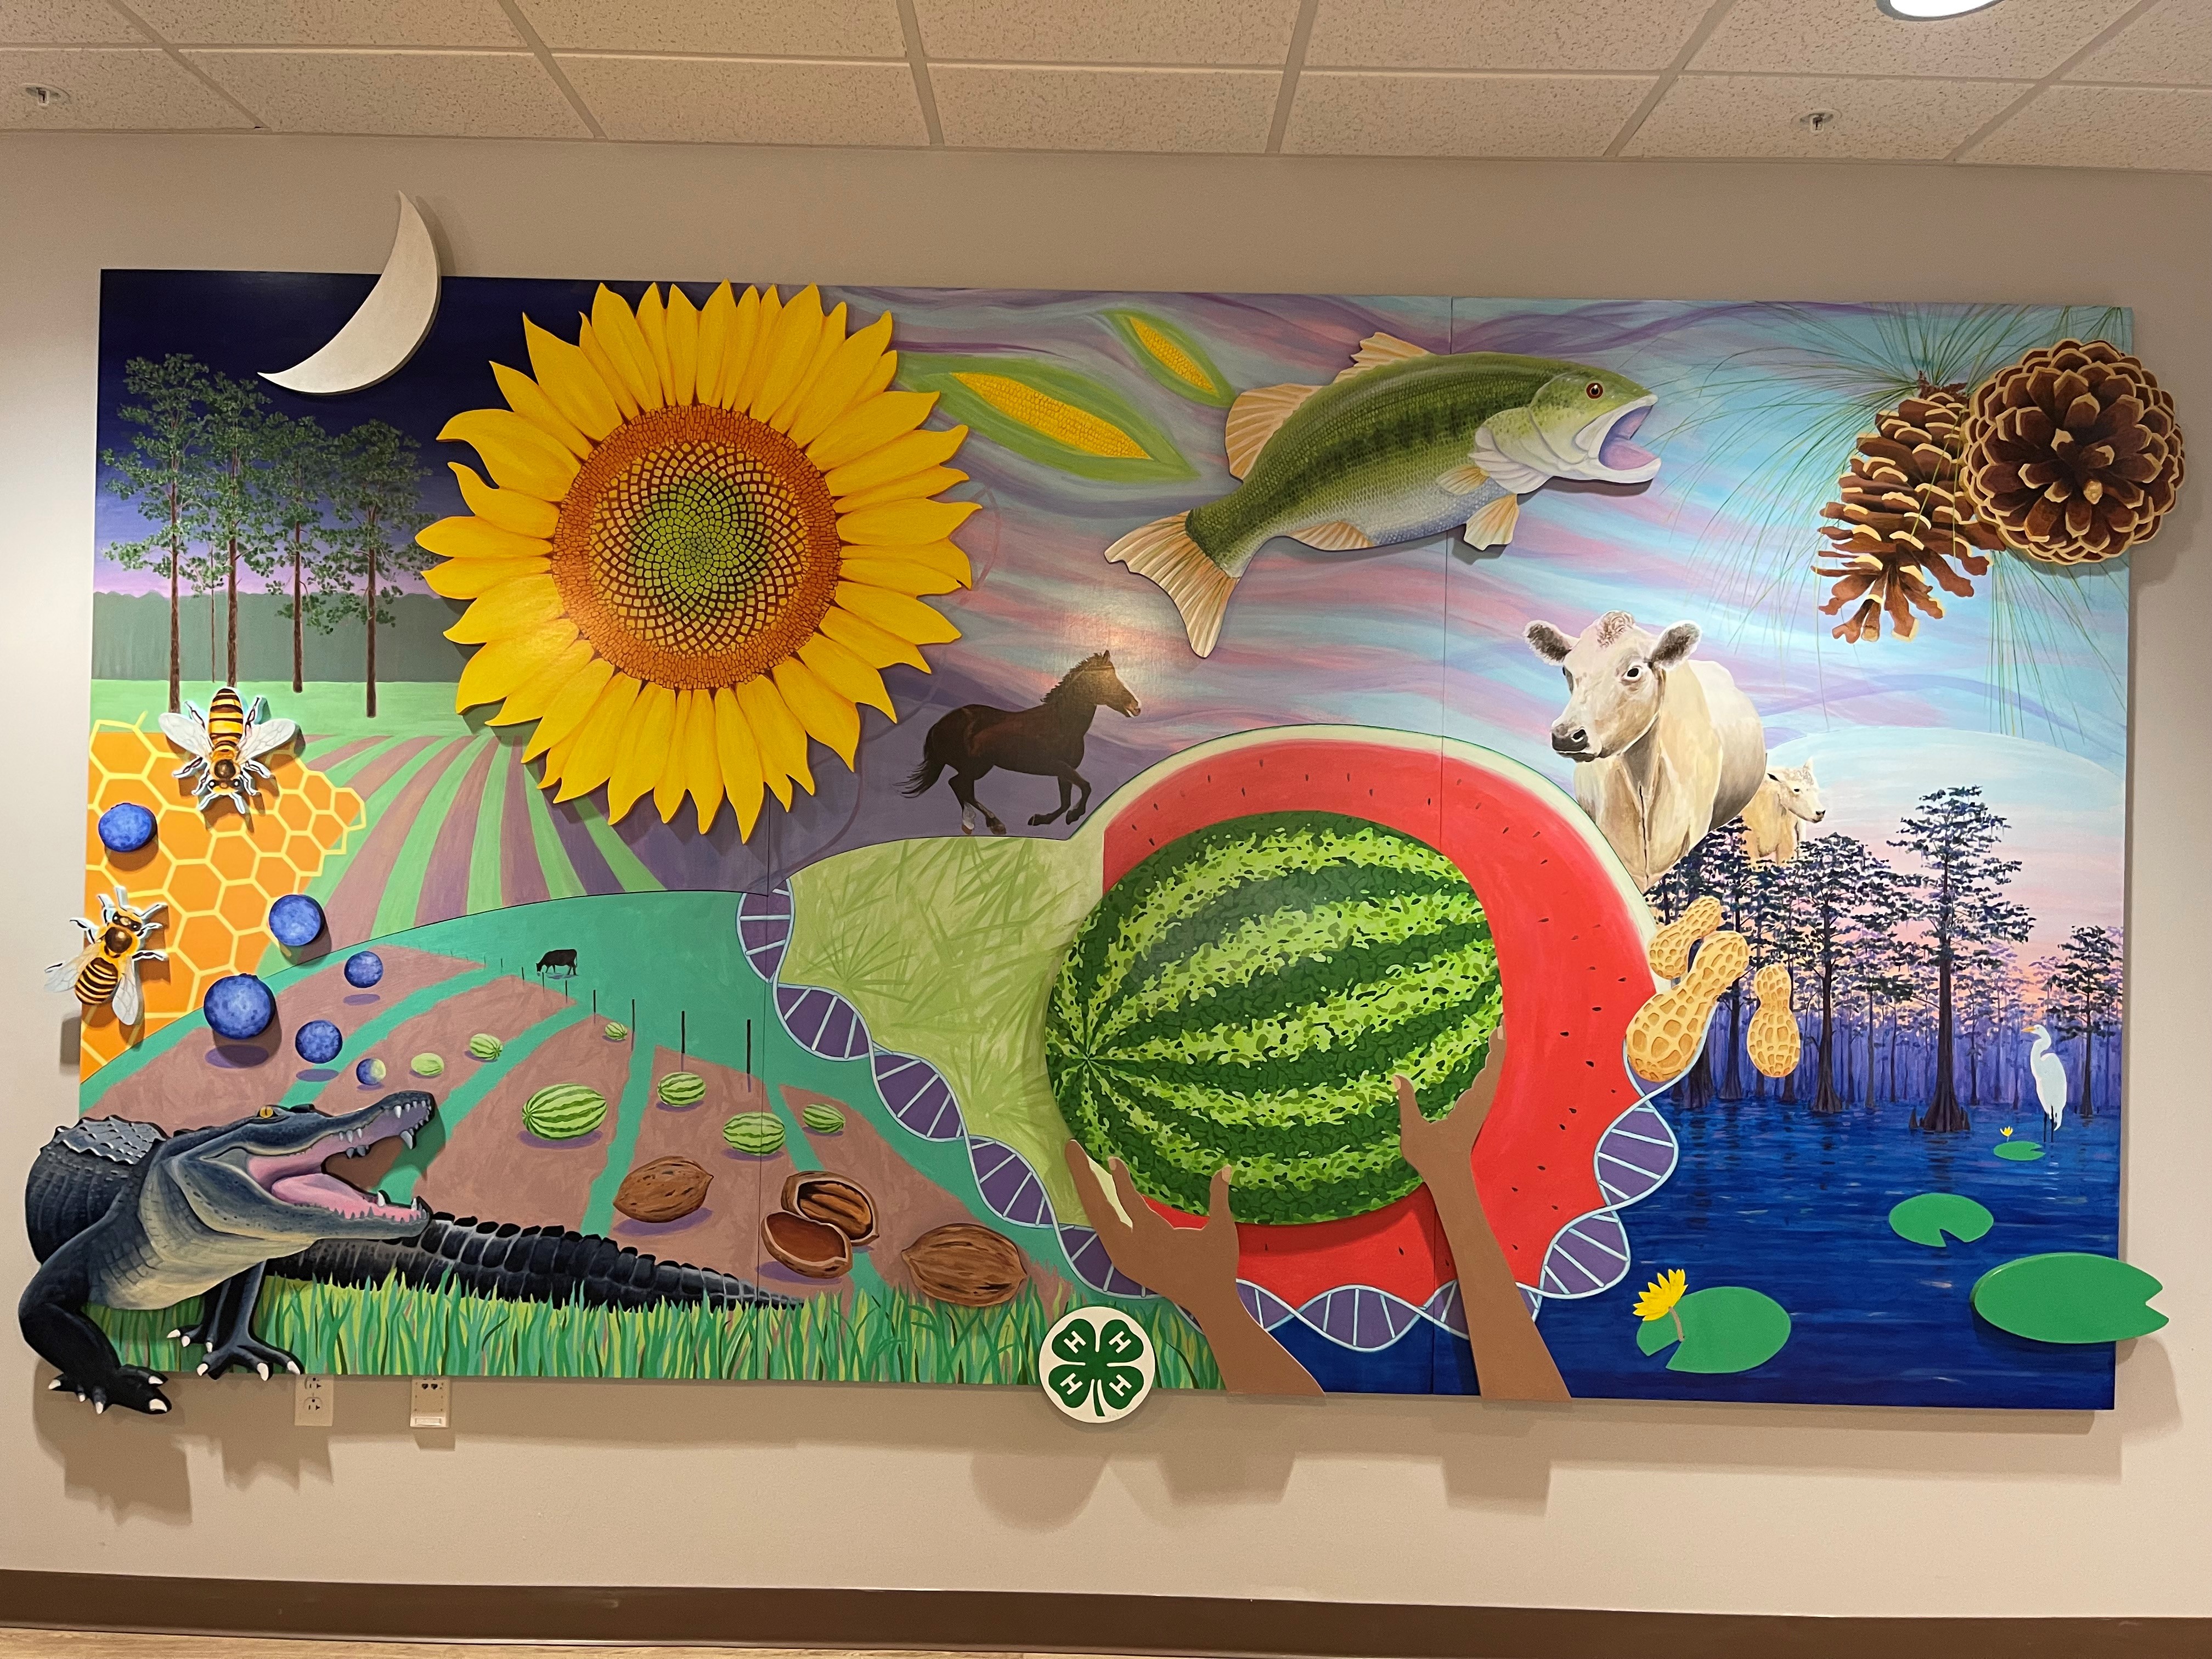 3D Mural depicting farms, alligators, fish, watermelons, and sunflowers